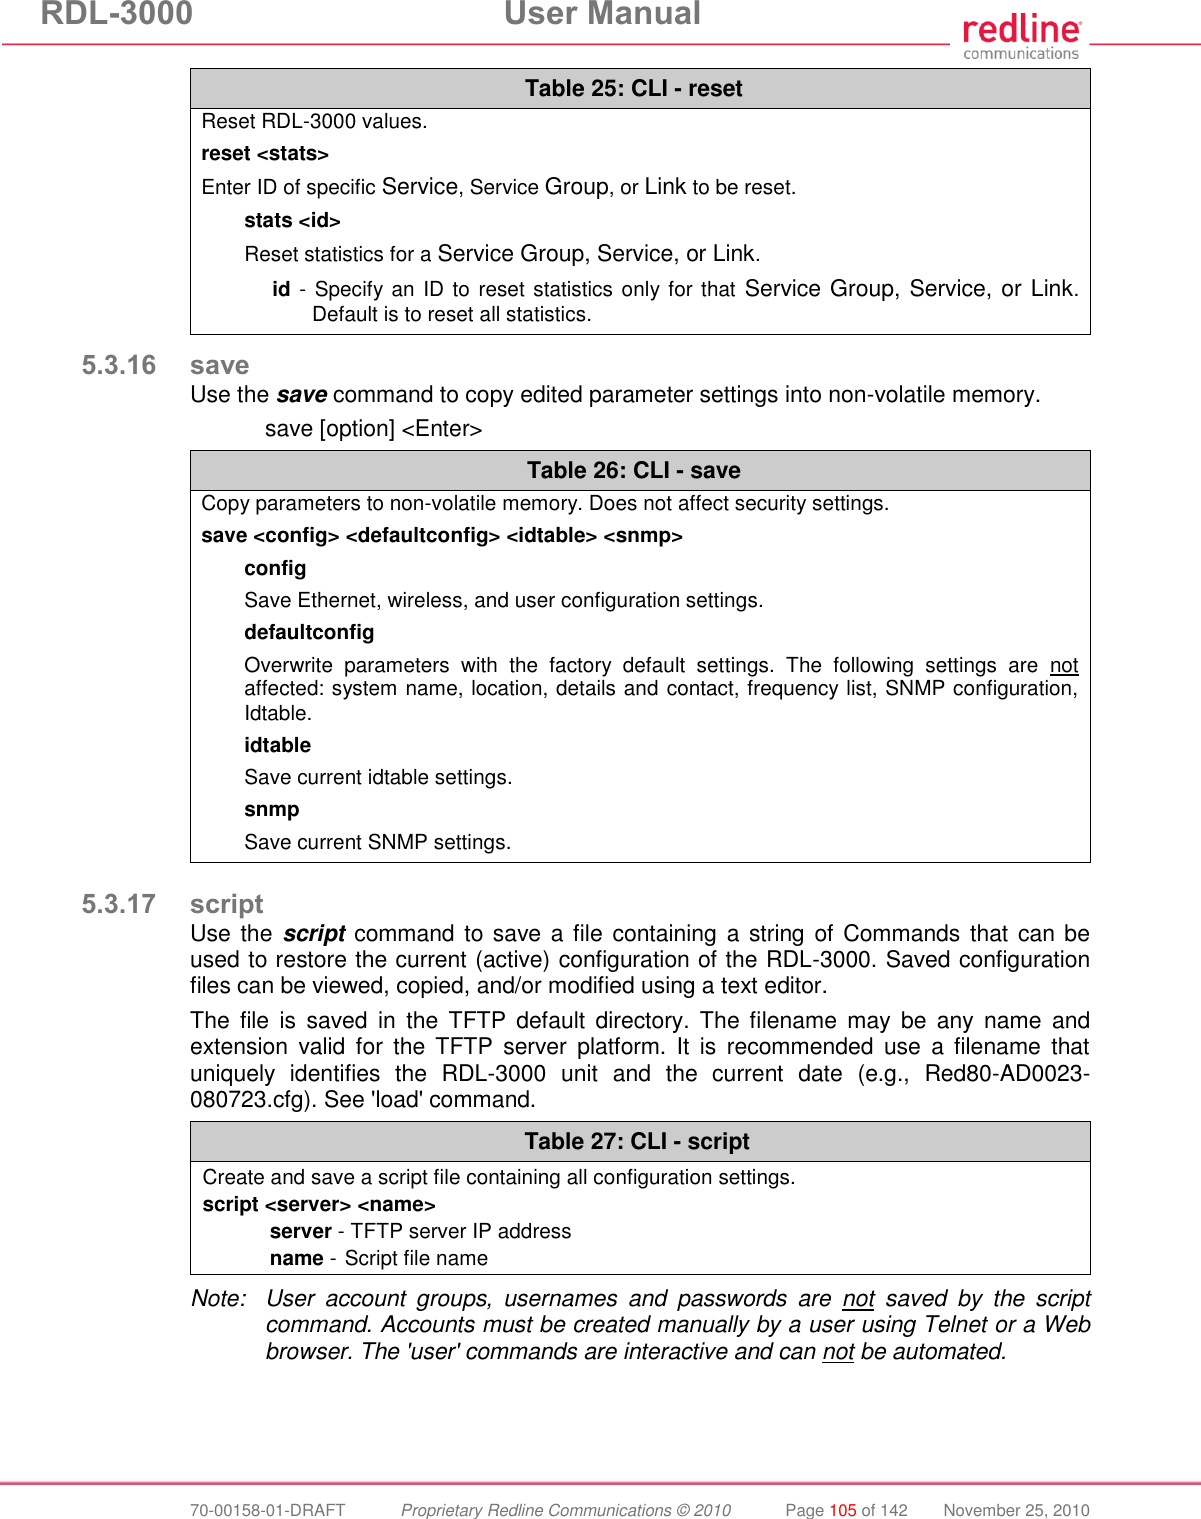 RDL-3000  User Manual  70-00158-01-DRAFT  Proprietary Redline Communications © 2010  Page 105 of 142  November 25, 2010 Table 25: CLI - reset Reset RDL-3000 values. reset &lt;stats&gt; Enter ID of specific Service, Service Group, or Link to be reset. stats &lt;id&gt; Reset statistics for a Service Group, Service, or Link. id - Specify an ID to reset statistics only for that  Service Group, Service, or Link. Default is to reset all statistics.  5.3.16 save Use the save command to copy edited parameter settings into non-volatile memory.   save [option] &lt;Enter&gt; Table 26: CLI - save Copy parameters to non-volatile memory. Does not affect security settings. save &lt;config&gt; &lt;defaultconfig&gt; &lt;idtable&gt; &lt;snmp&gt; config Save Ethernet, wireless, and user configuration settings. defaultconfig Overwrite  parameters  with  the  factory  default  settings.  The  following  settings  are  not affected: system name, location, details and contact, frequency list, SNMP configuration, Idtable. idtable Save current idtable settings. snmp  Save current SNMP settings.   5.3.17 script Use the script  command to save a file  containing a string of Commands that  can be used to restore the current (active) configuration of the RDL-3000. Saved configuration files can be viewed, copied, and/or modified using a text editor.  The  file  is  saved  in  the  TFTP  default  directory.  The  filename  may  be  any  name  and extension  valid  for  the TFTP  server  platform.  It  is  recommended  use  a  filename  that uniquely  identifies  the  RDL-3000  unit  and  the  current  date  (e.g.,  Red80-AD0023-080723.cfg). See &apos;load&apos; command.  Table 27: CLI - script Create and save a script file containing all configuration settings. script &lt;server&gt; &lt;name&gt; server - TFTP server IP address name -  Script file name   Note:  User  account  groups,  usernames  and  passwords  are  not  saved  by  the  script command. Accounts must be created manually by a user using Telnet or a Web browser. The &apos;user&apos; commands are interactive and can not be automated. 